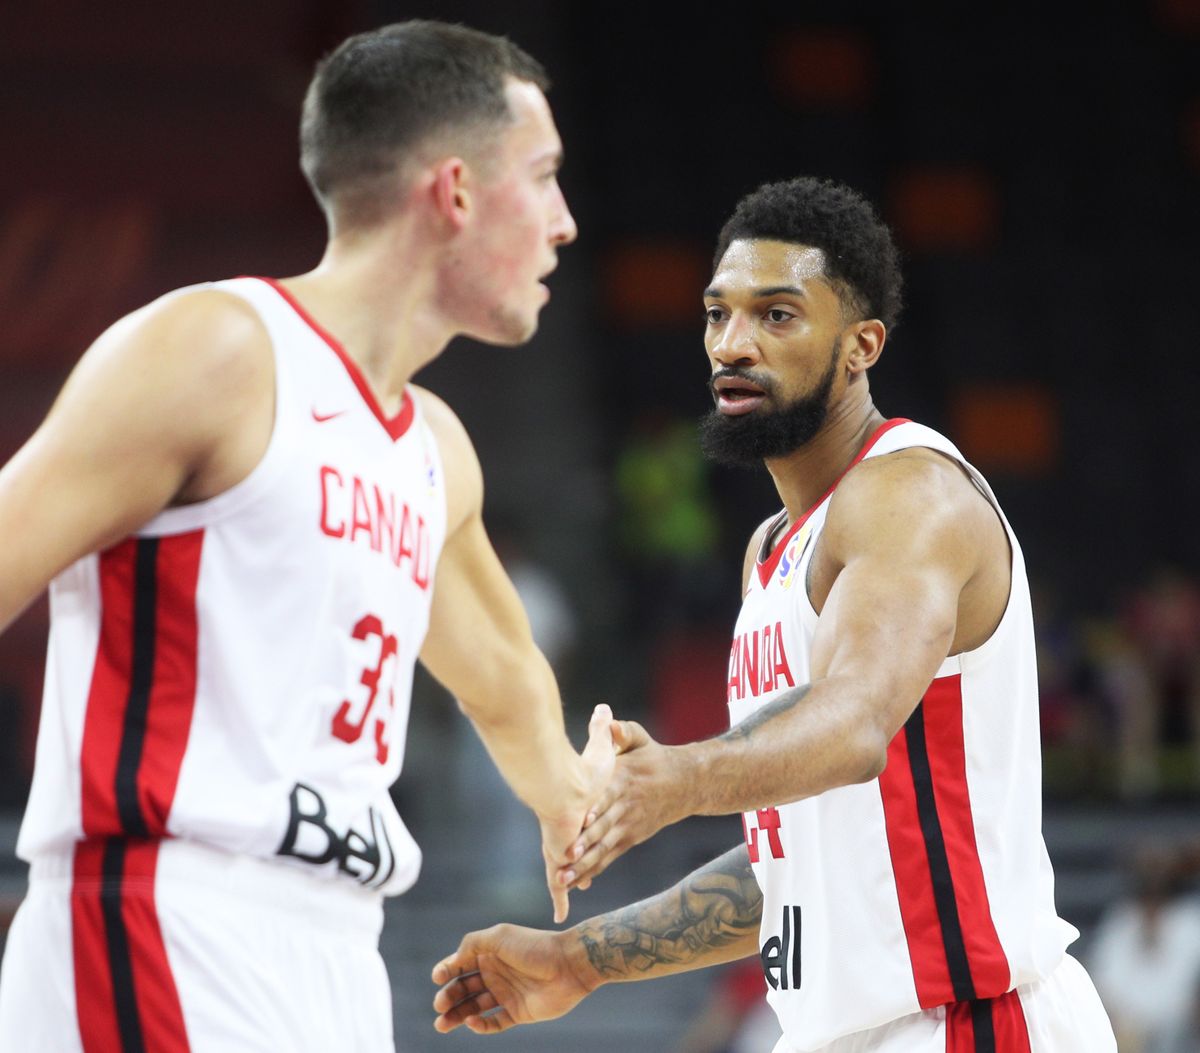 Canada’s Kyle Wiltjer, left, and Khem Birch prepare for a 2019 FIBA World Cup game in China.  (Associated Press)